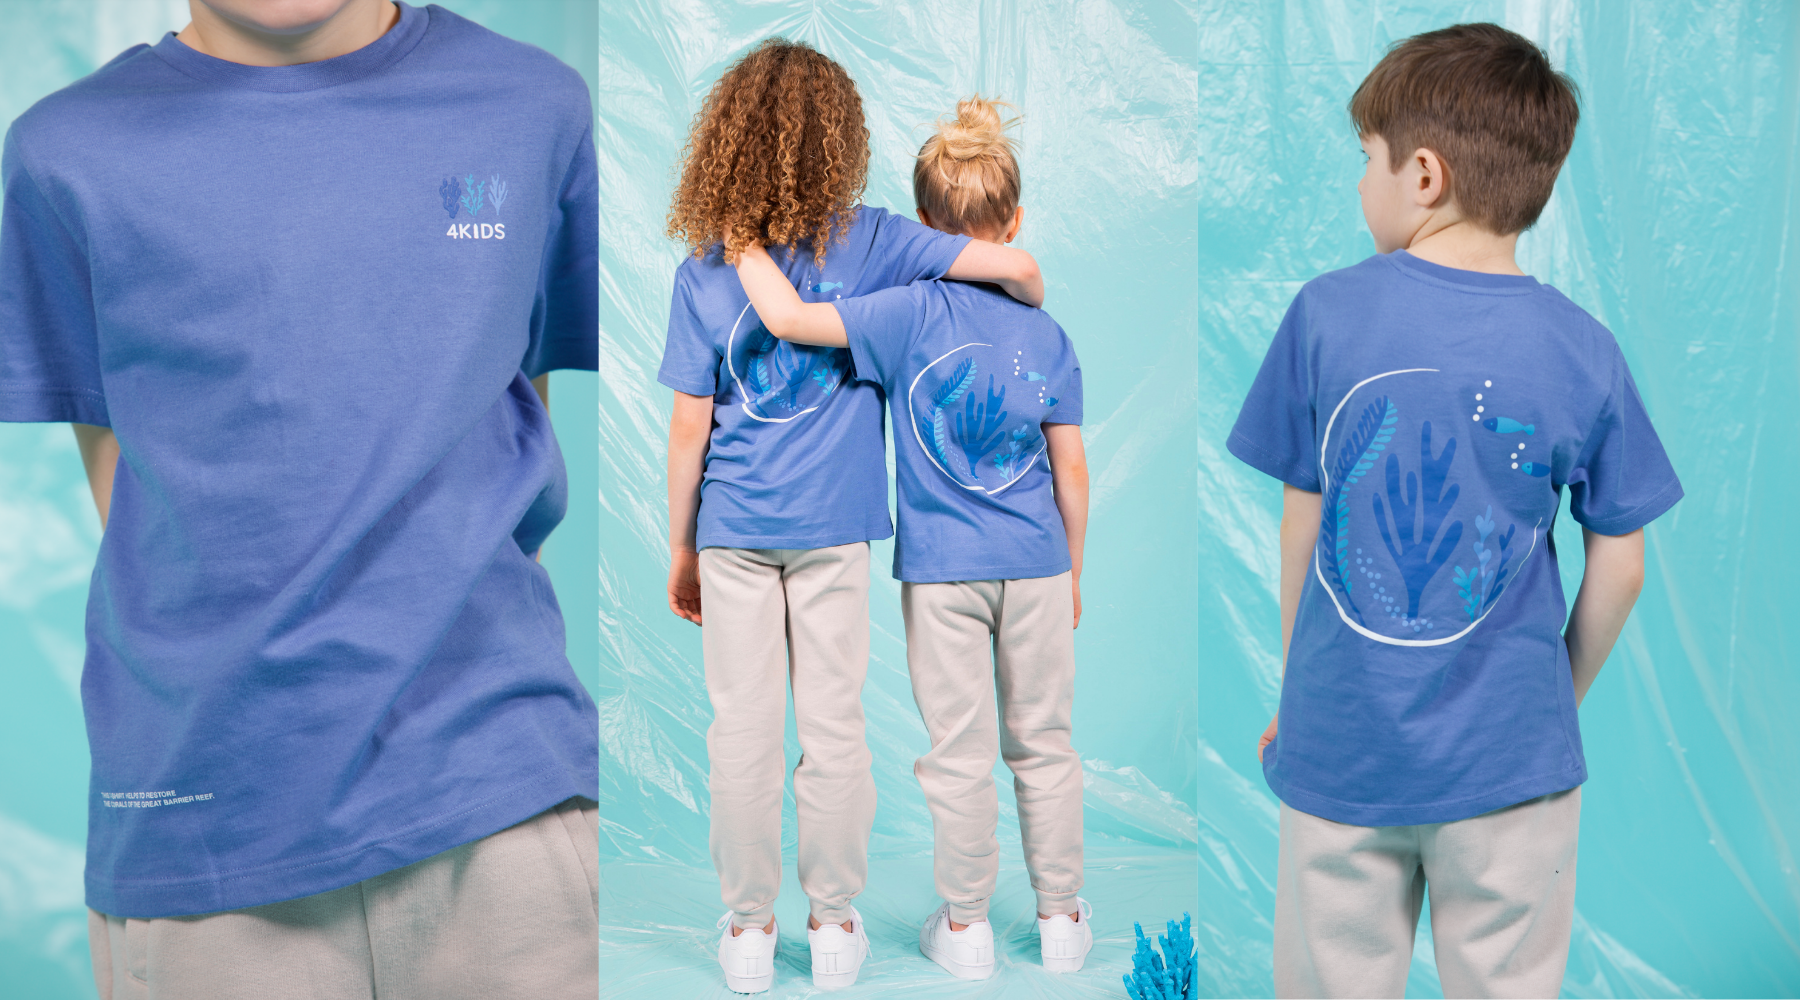 4KIDS Reef Tshirt Blue with design on the back